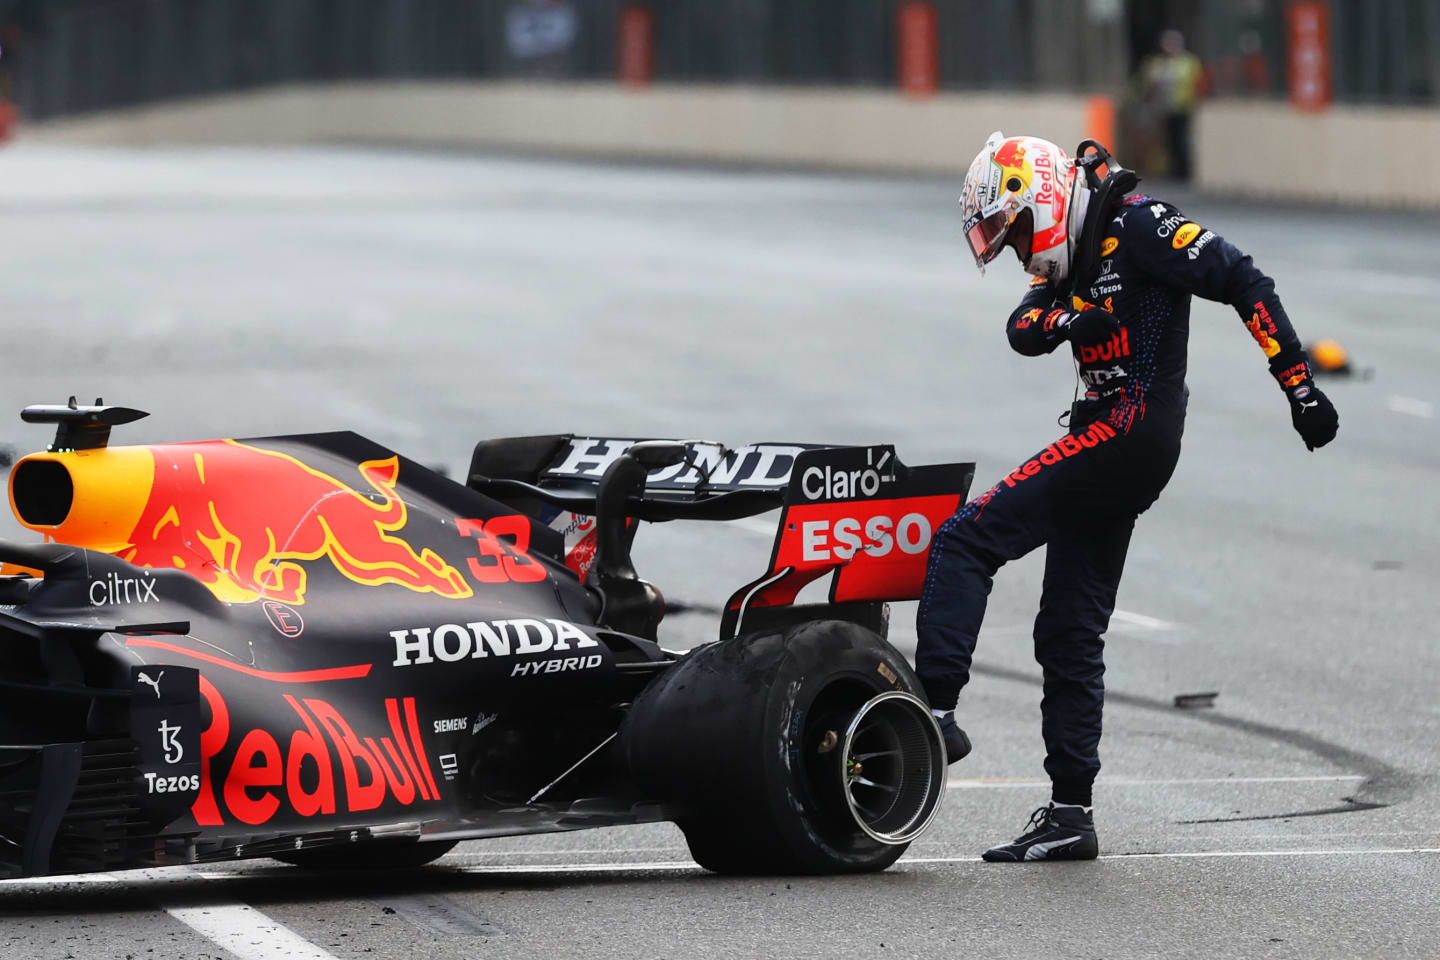 BAKU, AZERBAIJAN - JUNE 06:Max Verstappen of Netherlands and Red Bull Racing kicks his tyre as he reacts after crashing during the F1 Grand Prix of Azerbaijan at Baku City Circuit on June 06, 2021 in Baku, Azerbaijan. (Photo by Clive Rose/Getty Images)